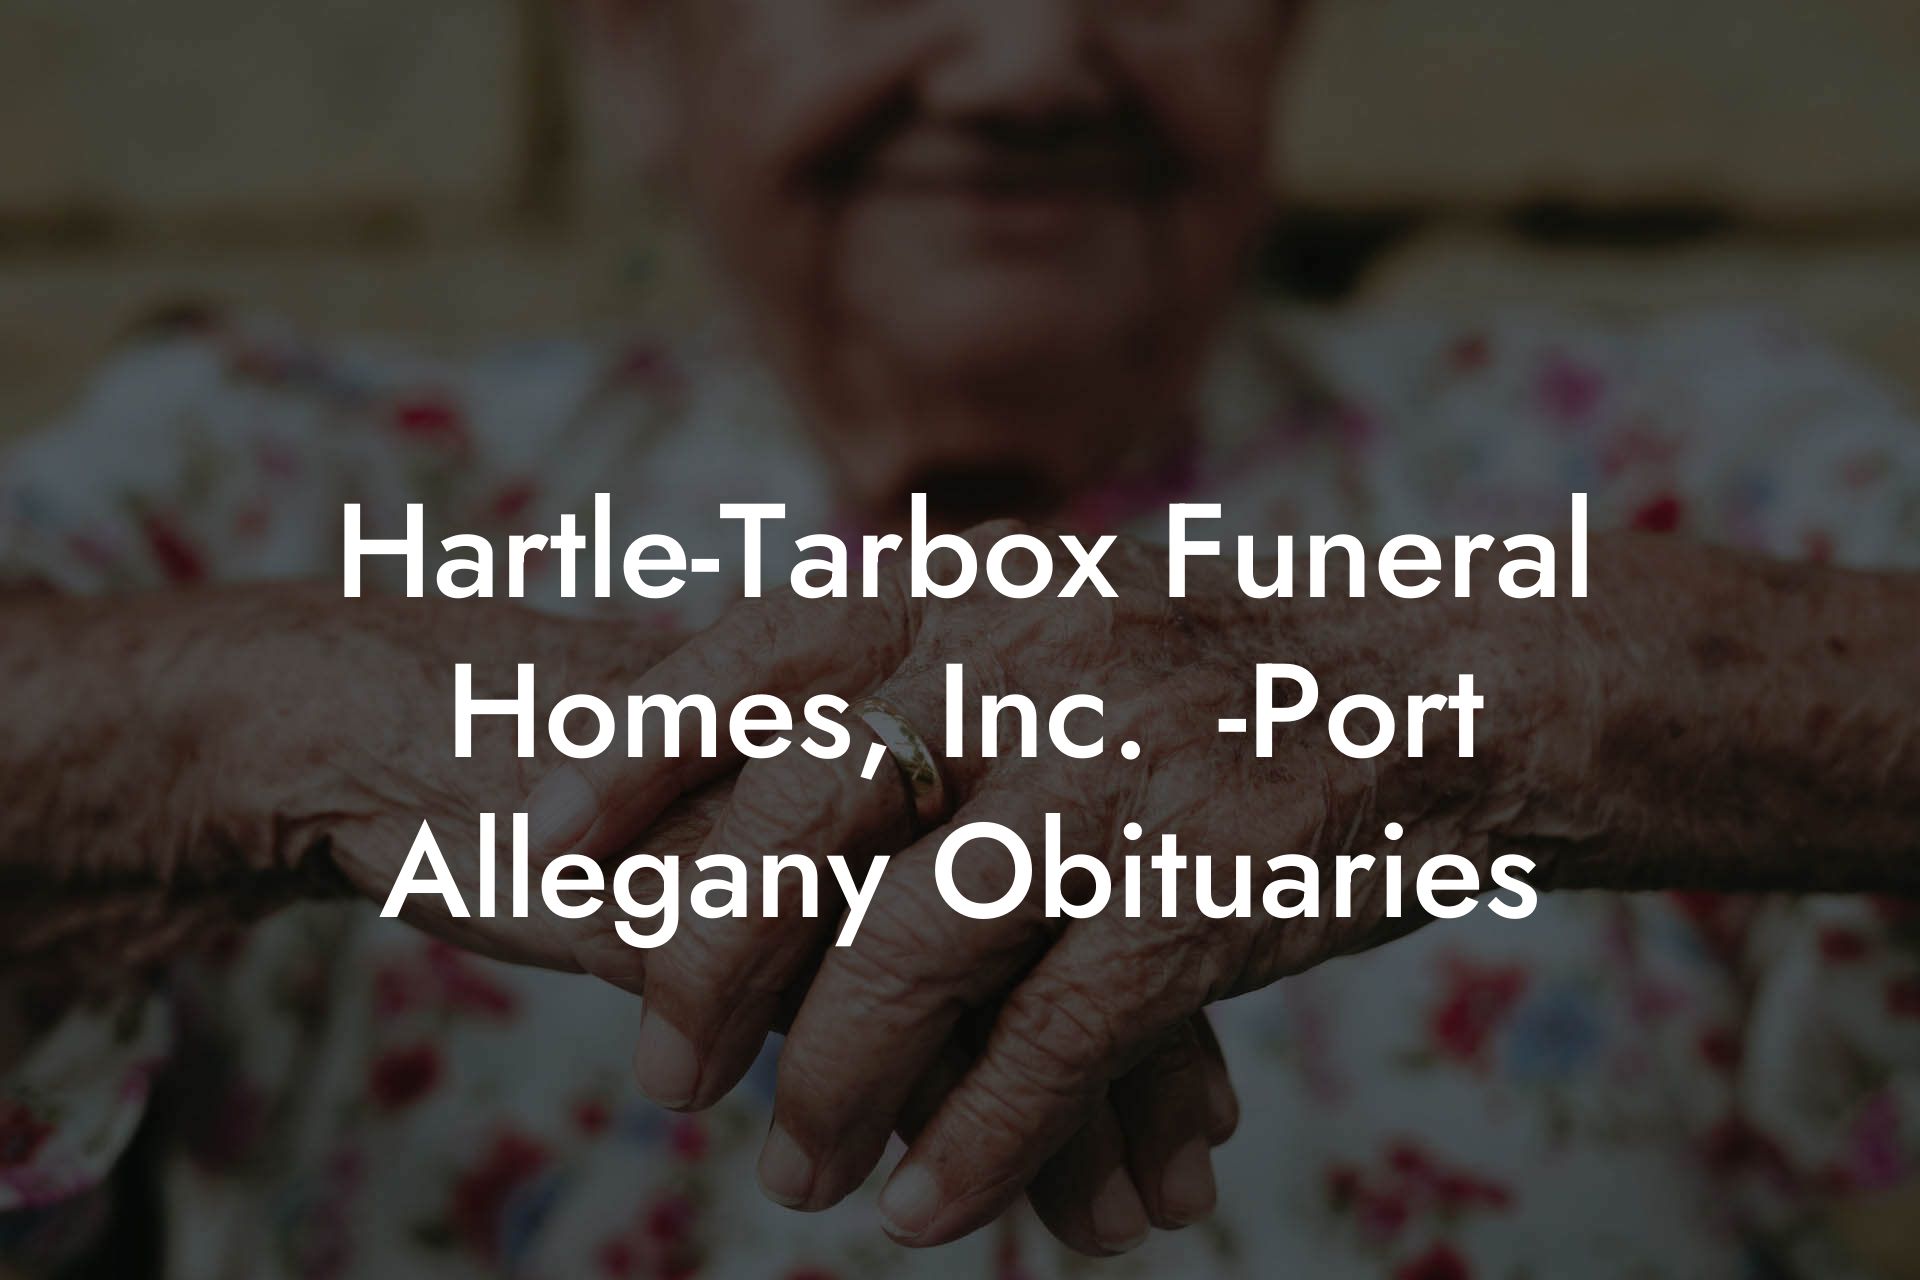 Hartle-Tarbox Funeral Homes, Inc.	-Port Allegany Obituaries